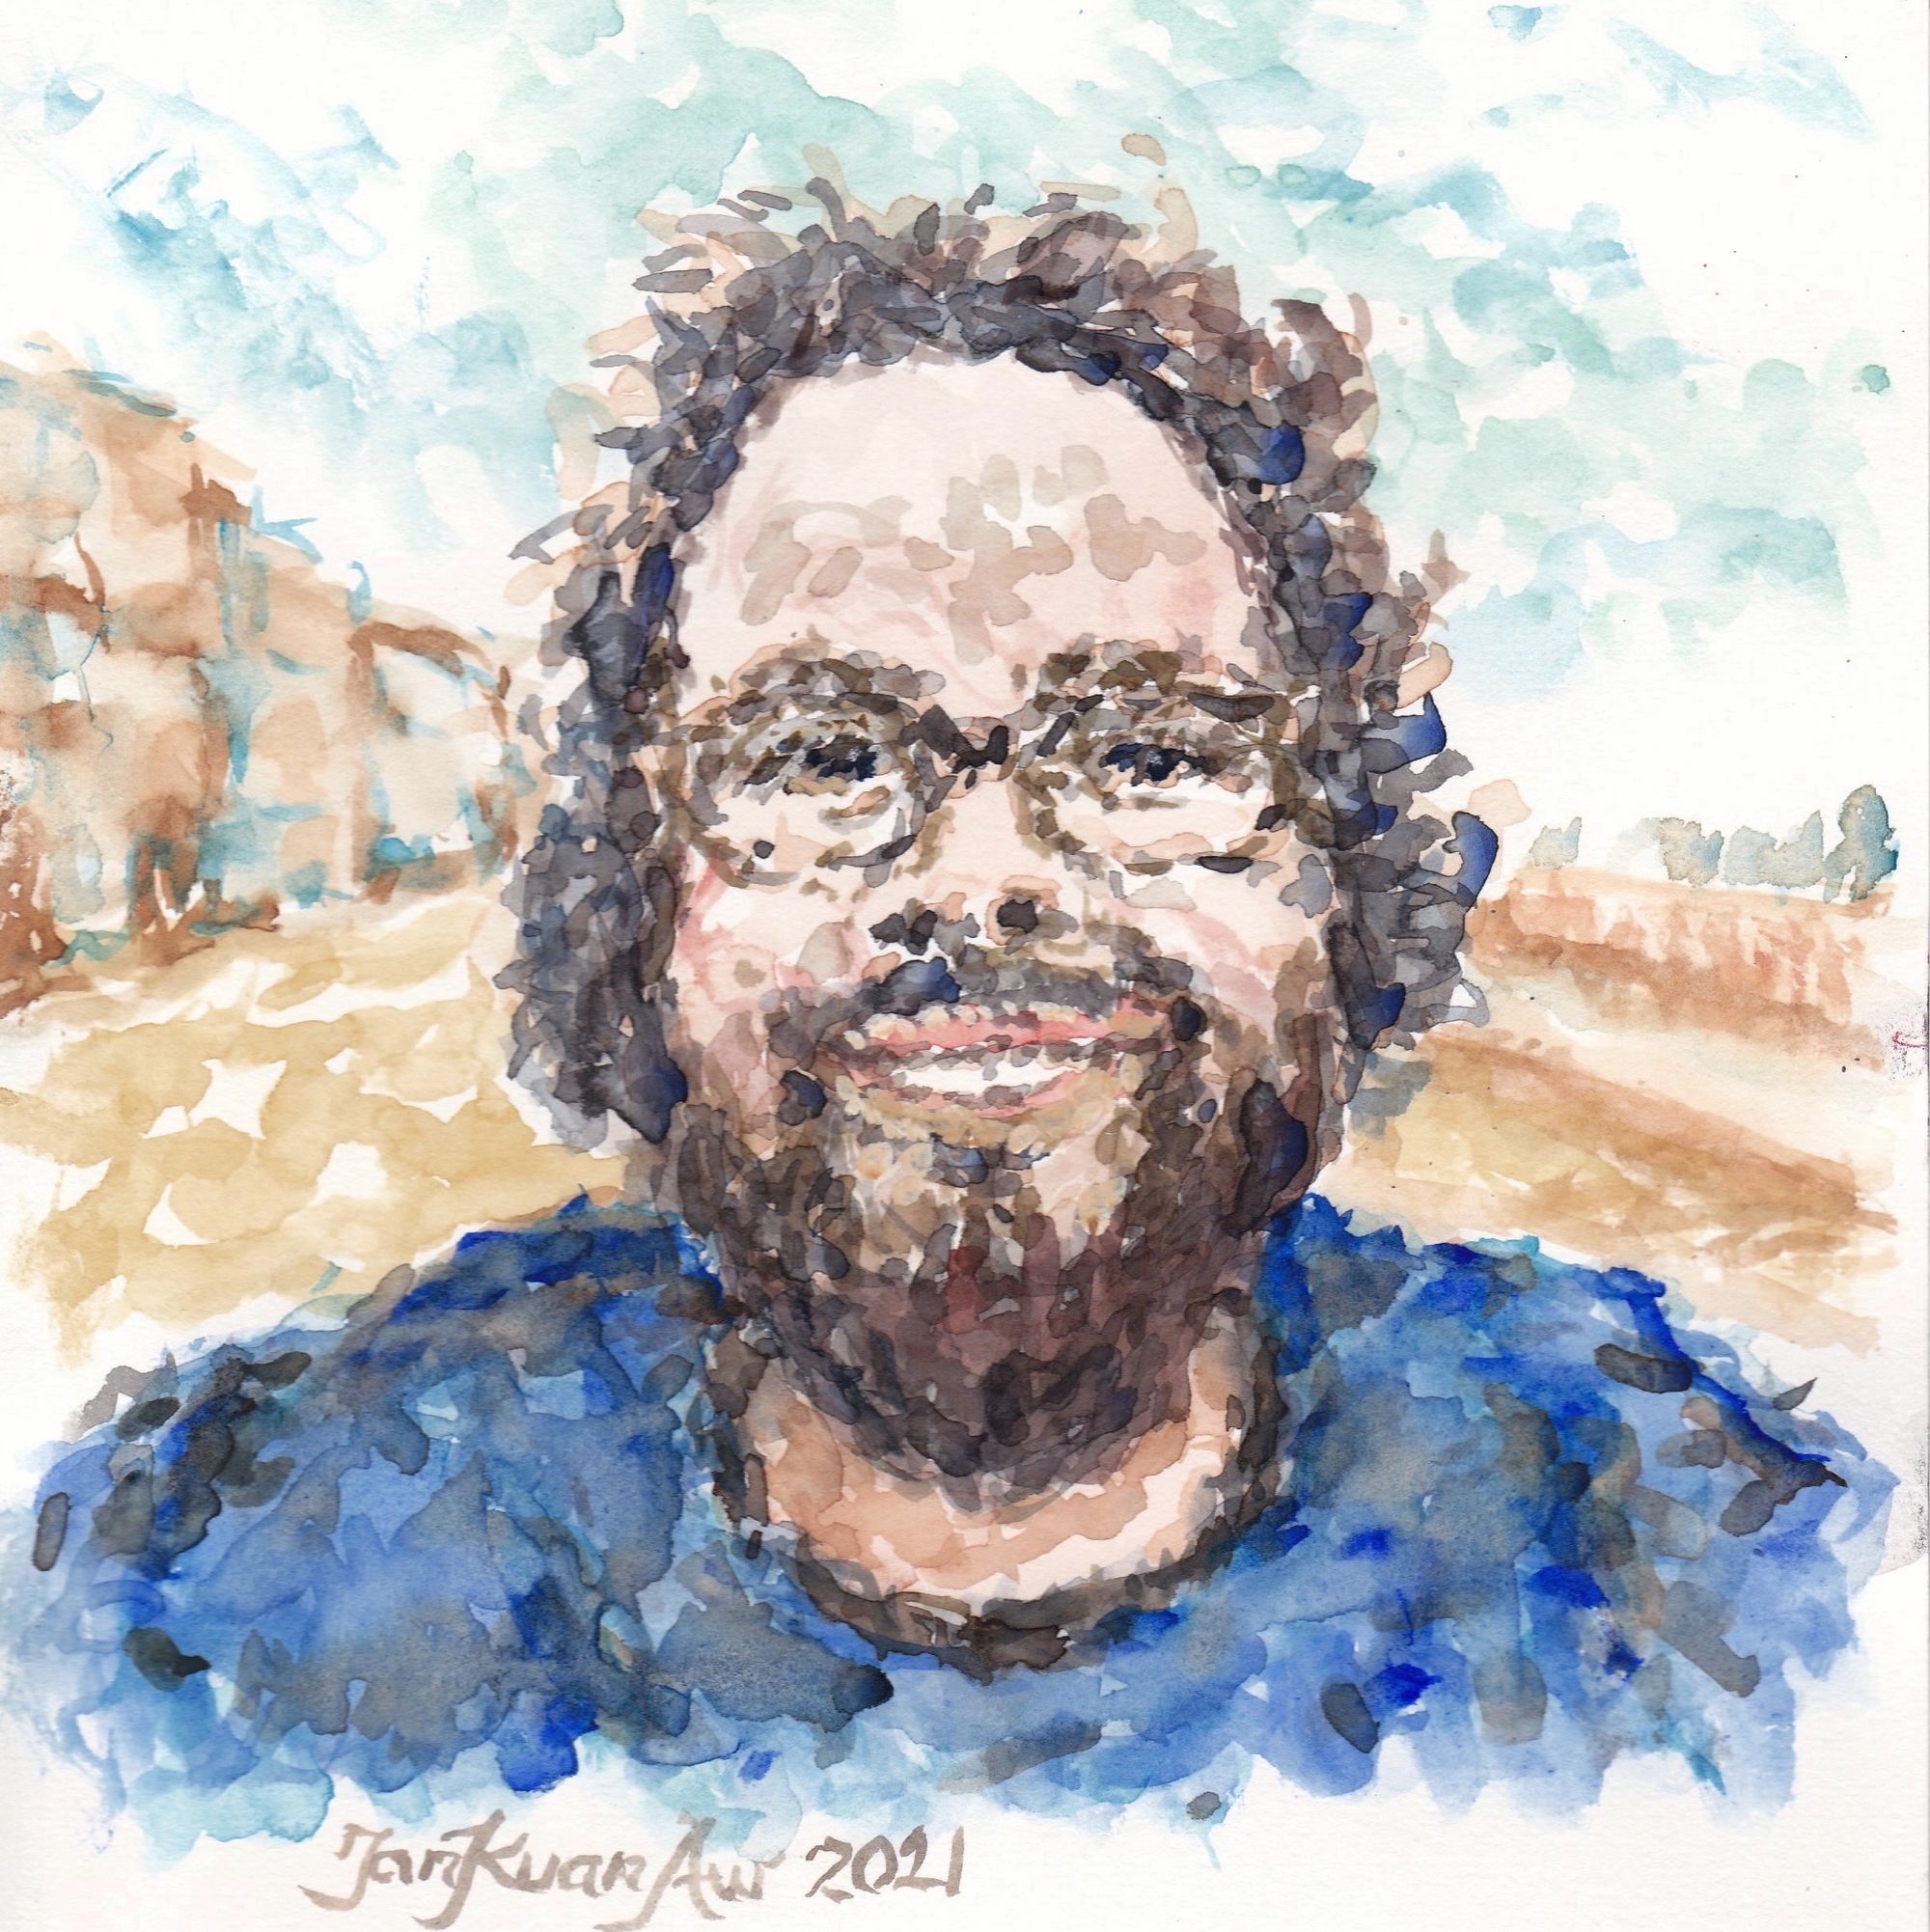 A watercolour portrait of Peter, a white man with glasses, dark curly hair and a beard, with a dark blue sweater.